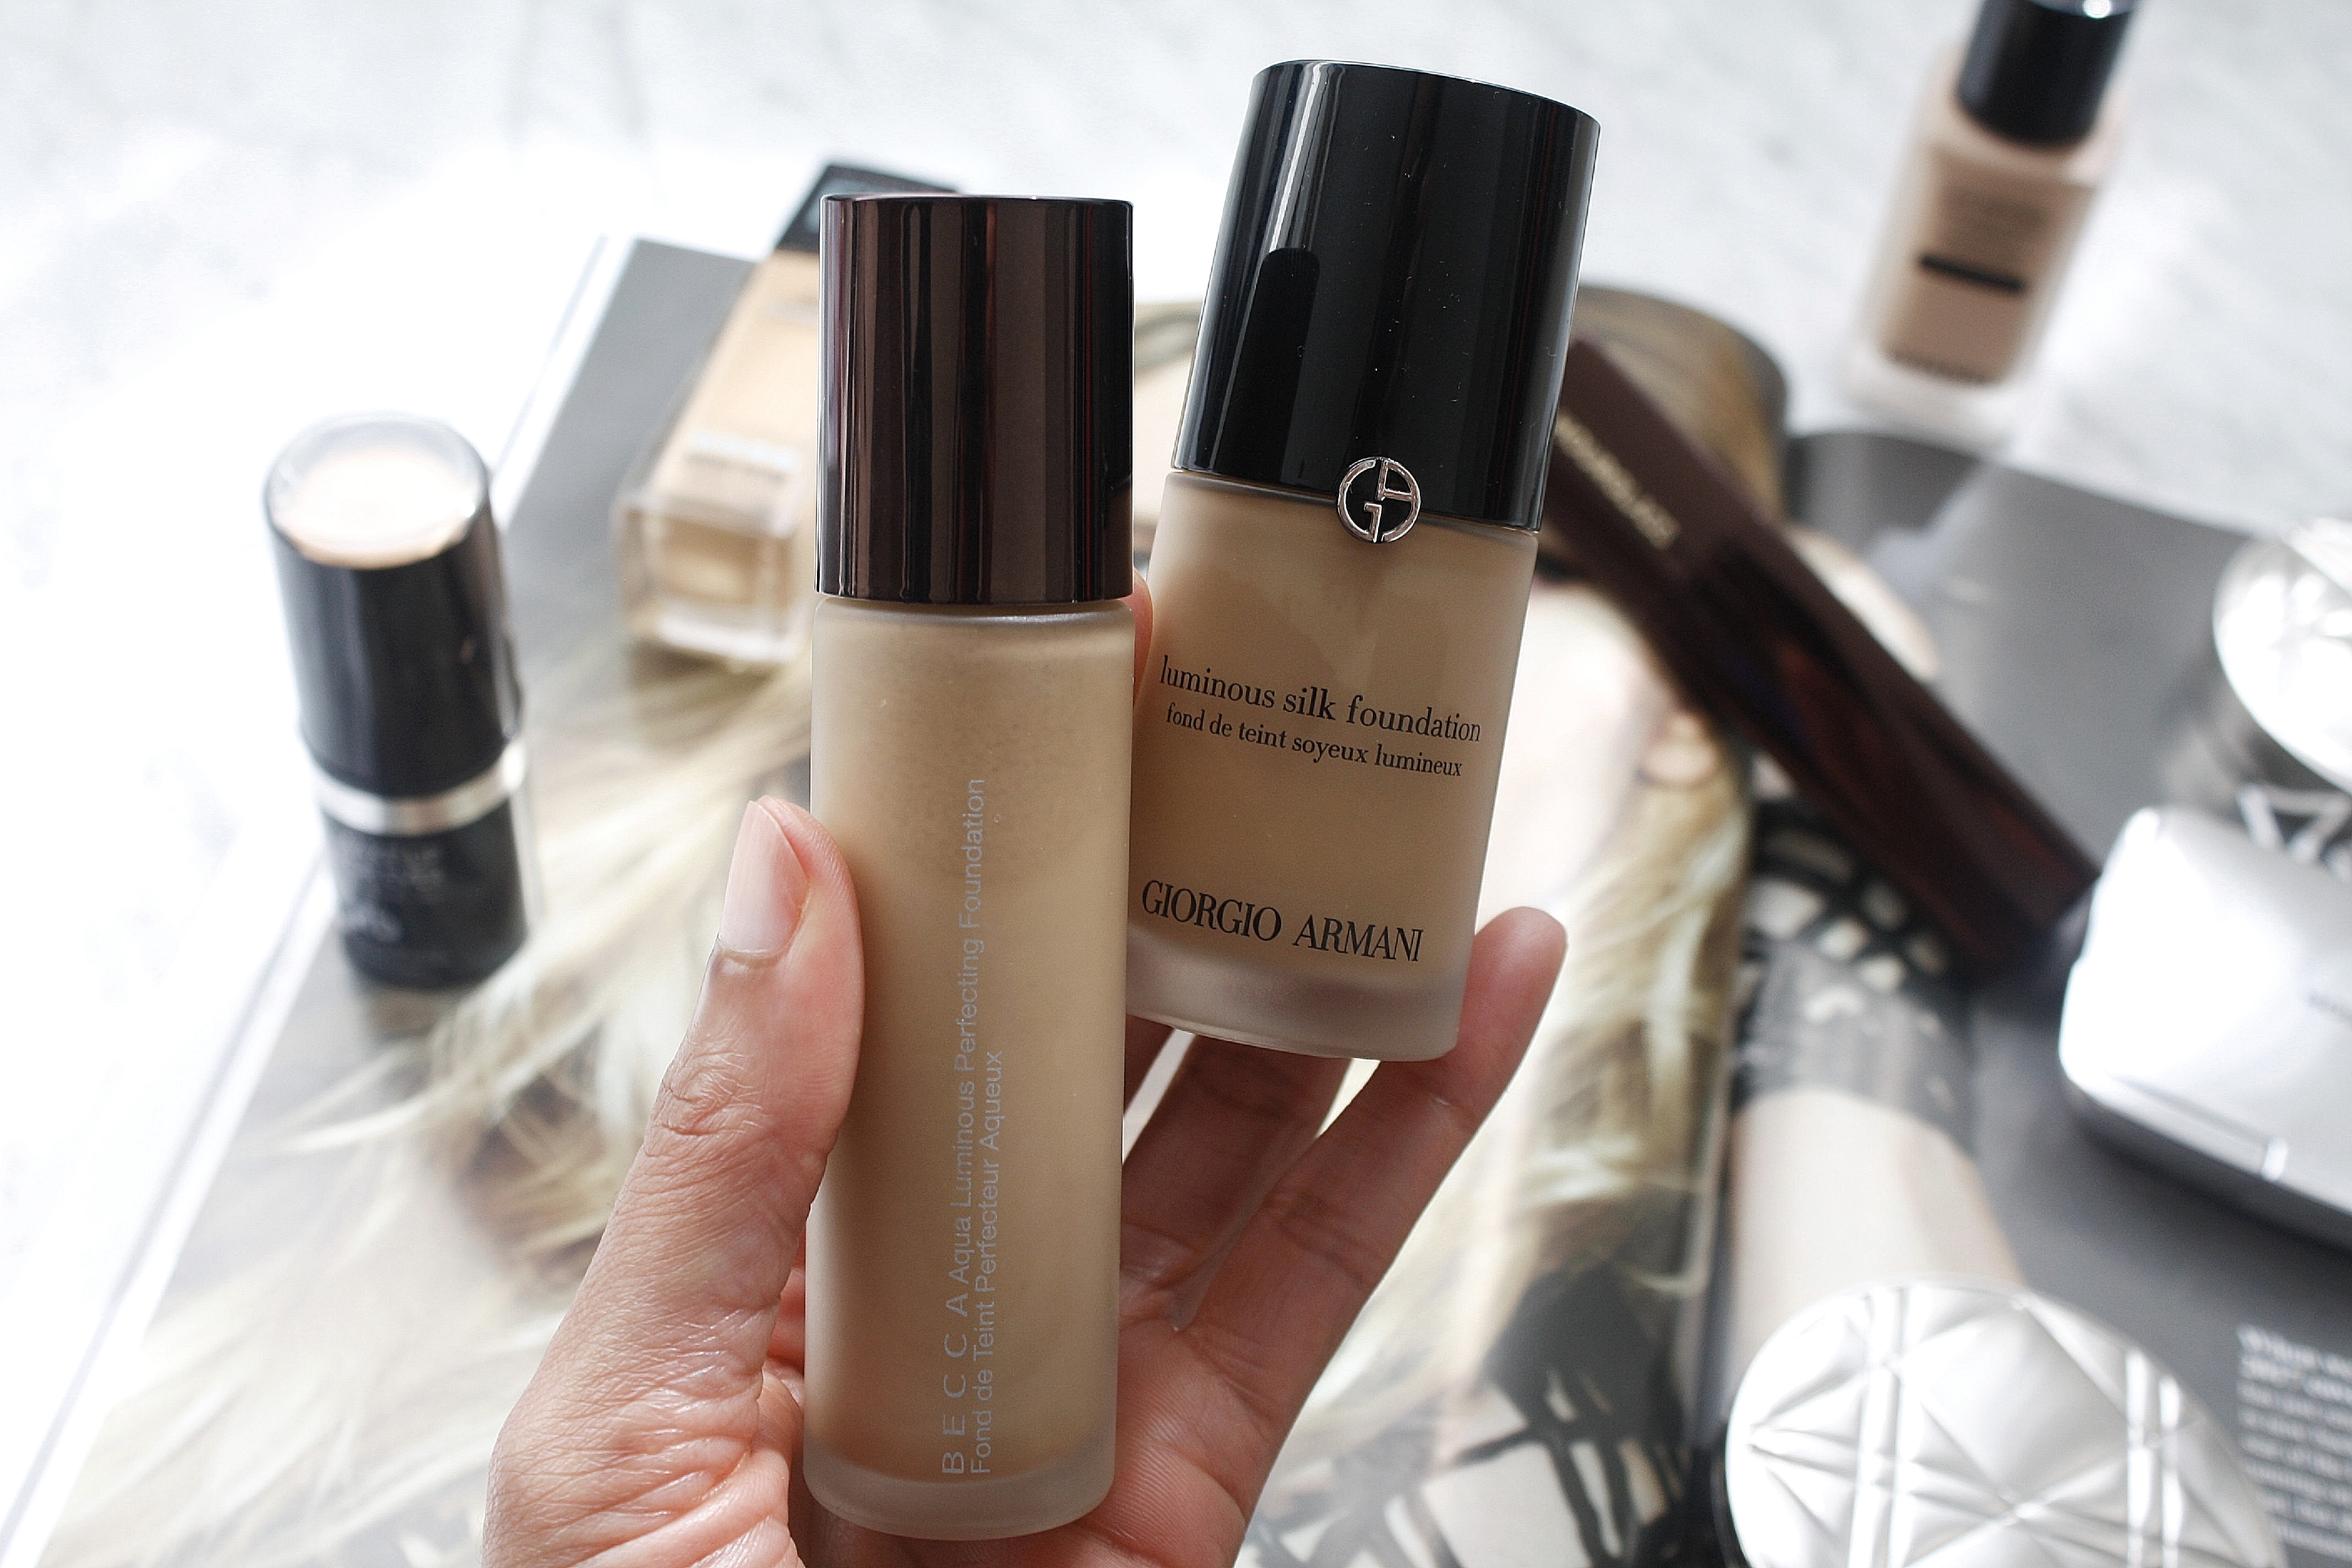 FOUNDATIONS THAT ARE PERFECT FOR EVERY SKIN TYPE